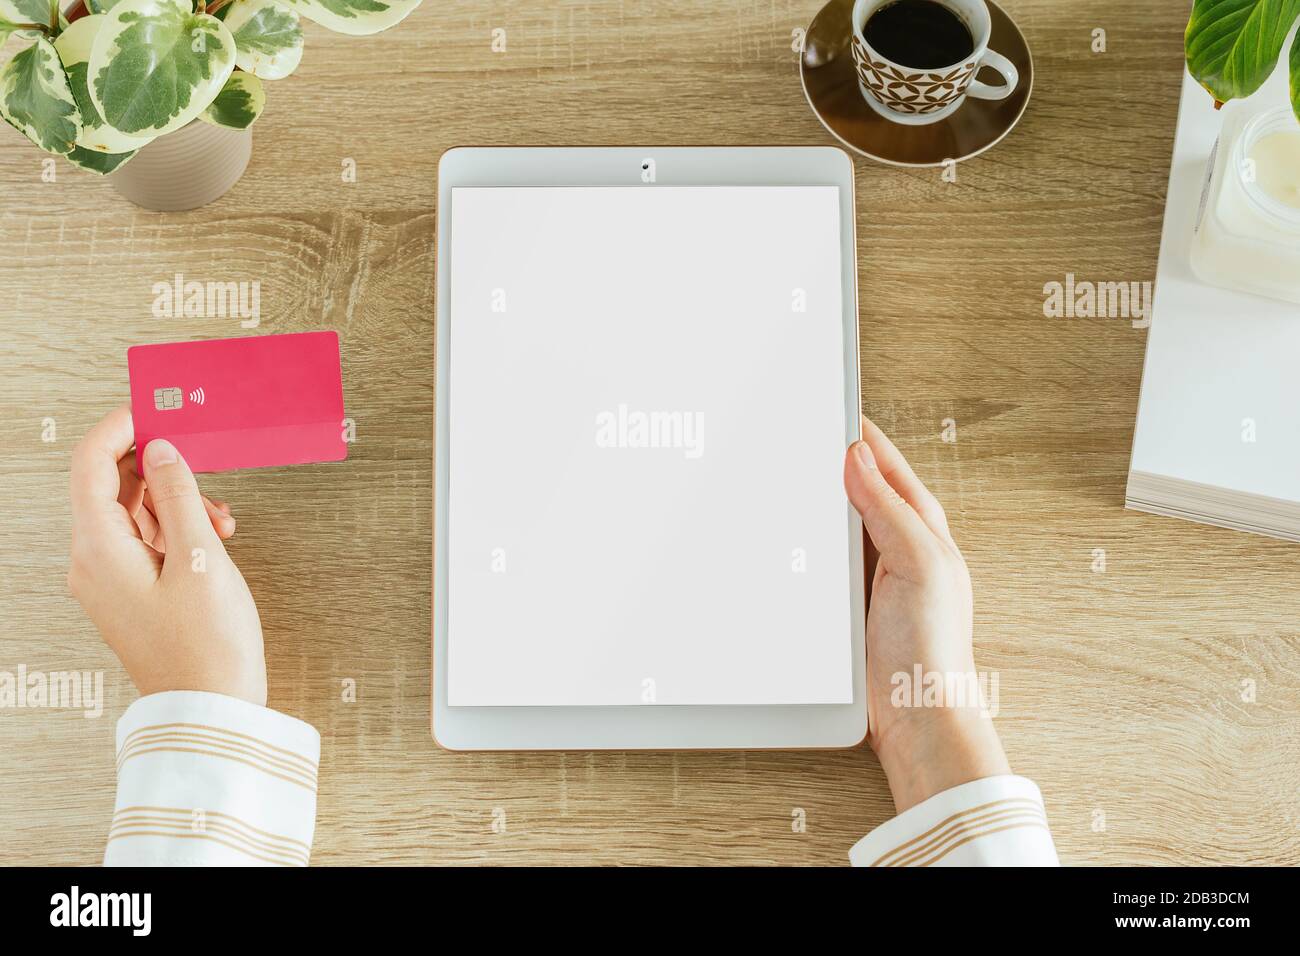 Vertical tablet mockup with a woman holding a credit card in her home. Blank screen to insert design. E-commerce concept Stock Photo